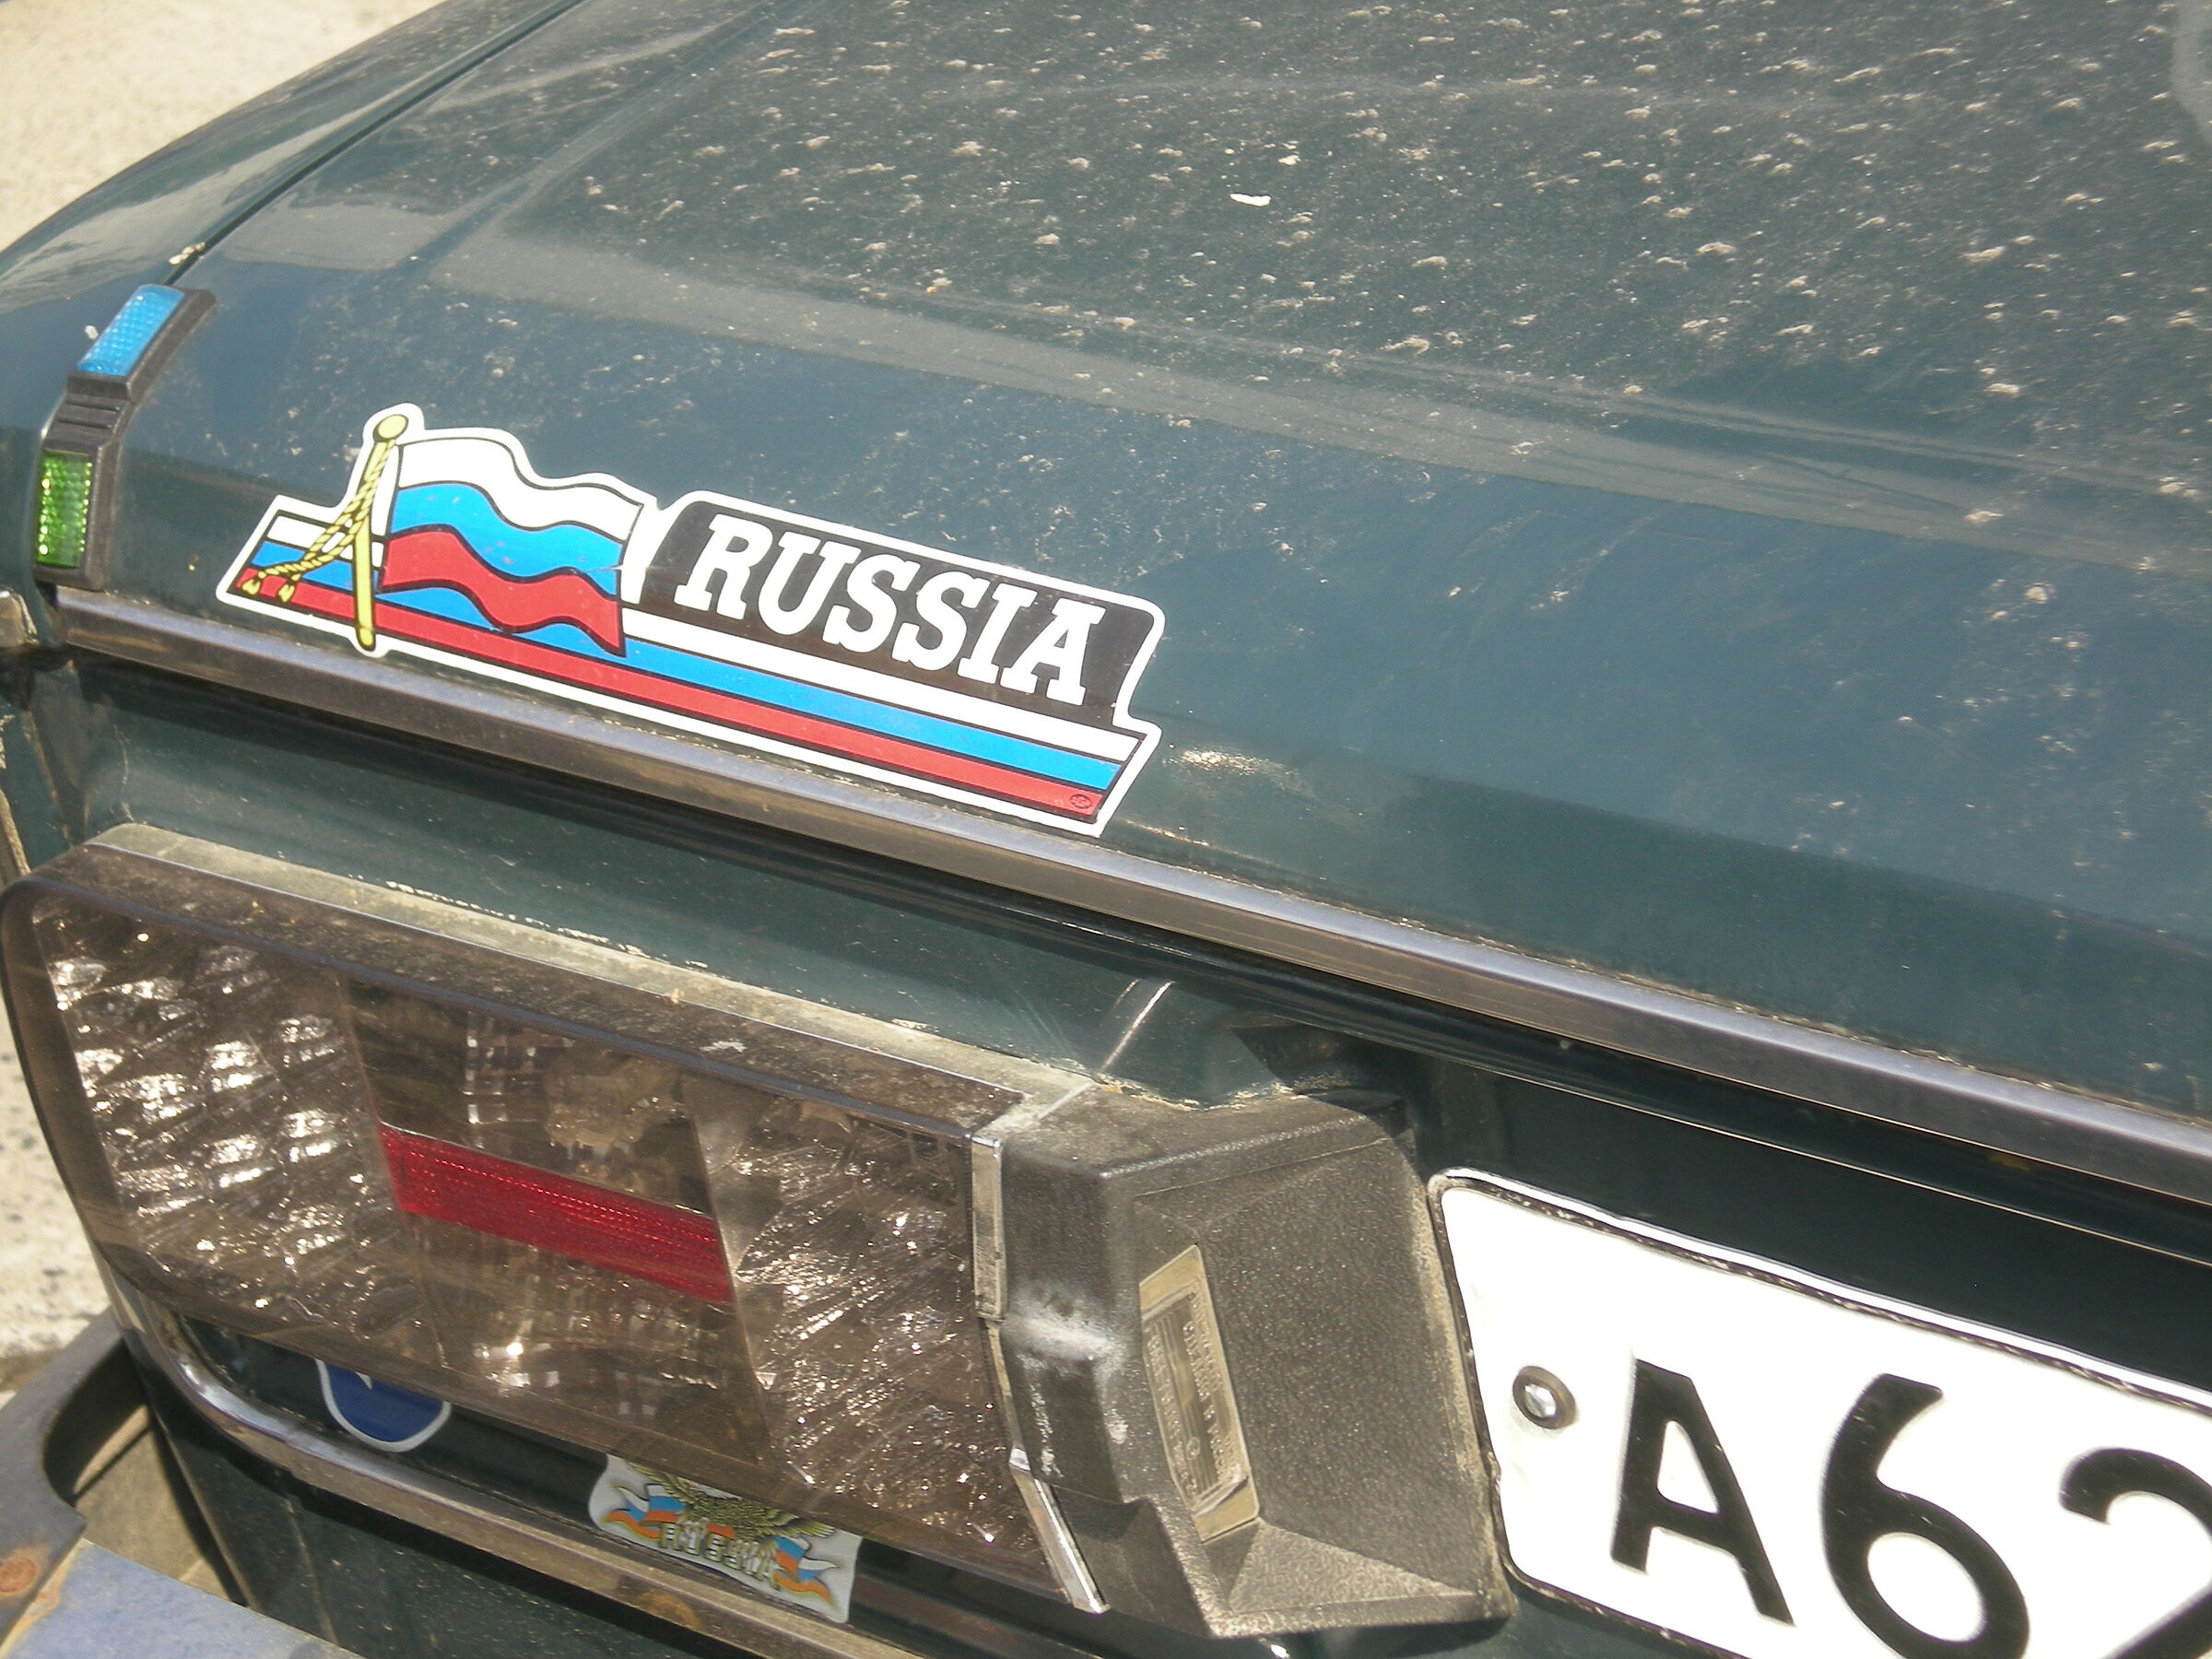 Typical Russian license plate...